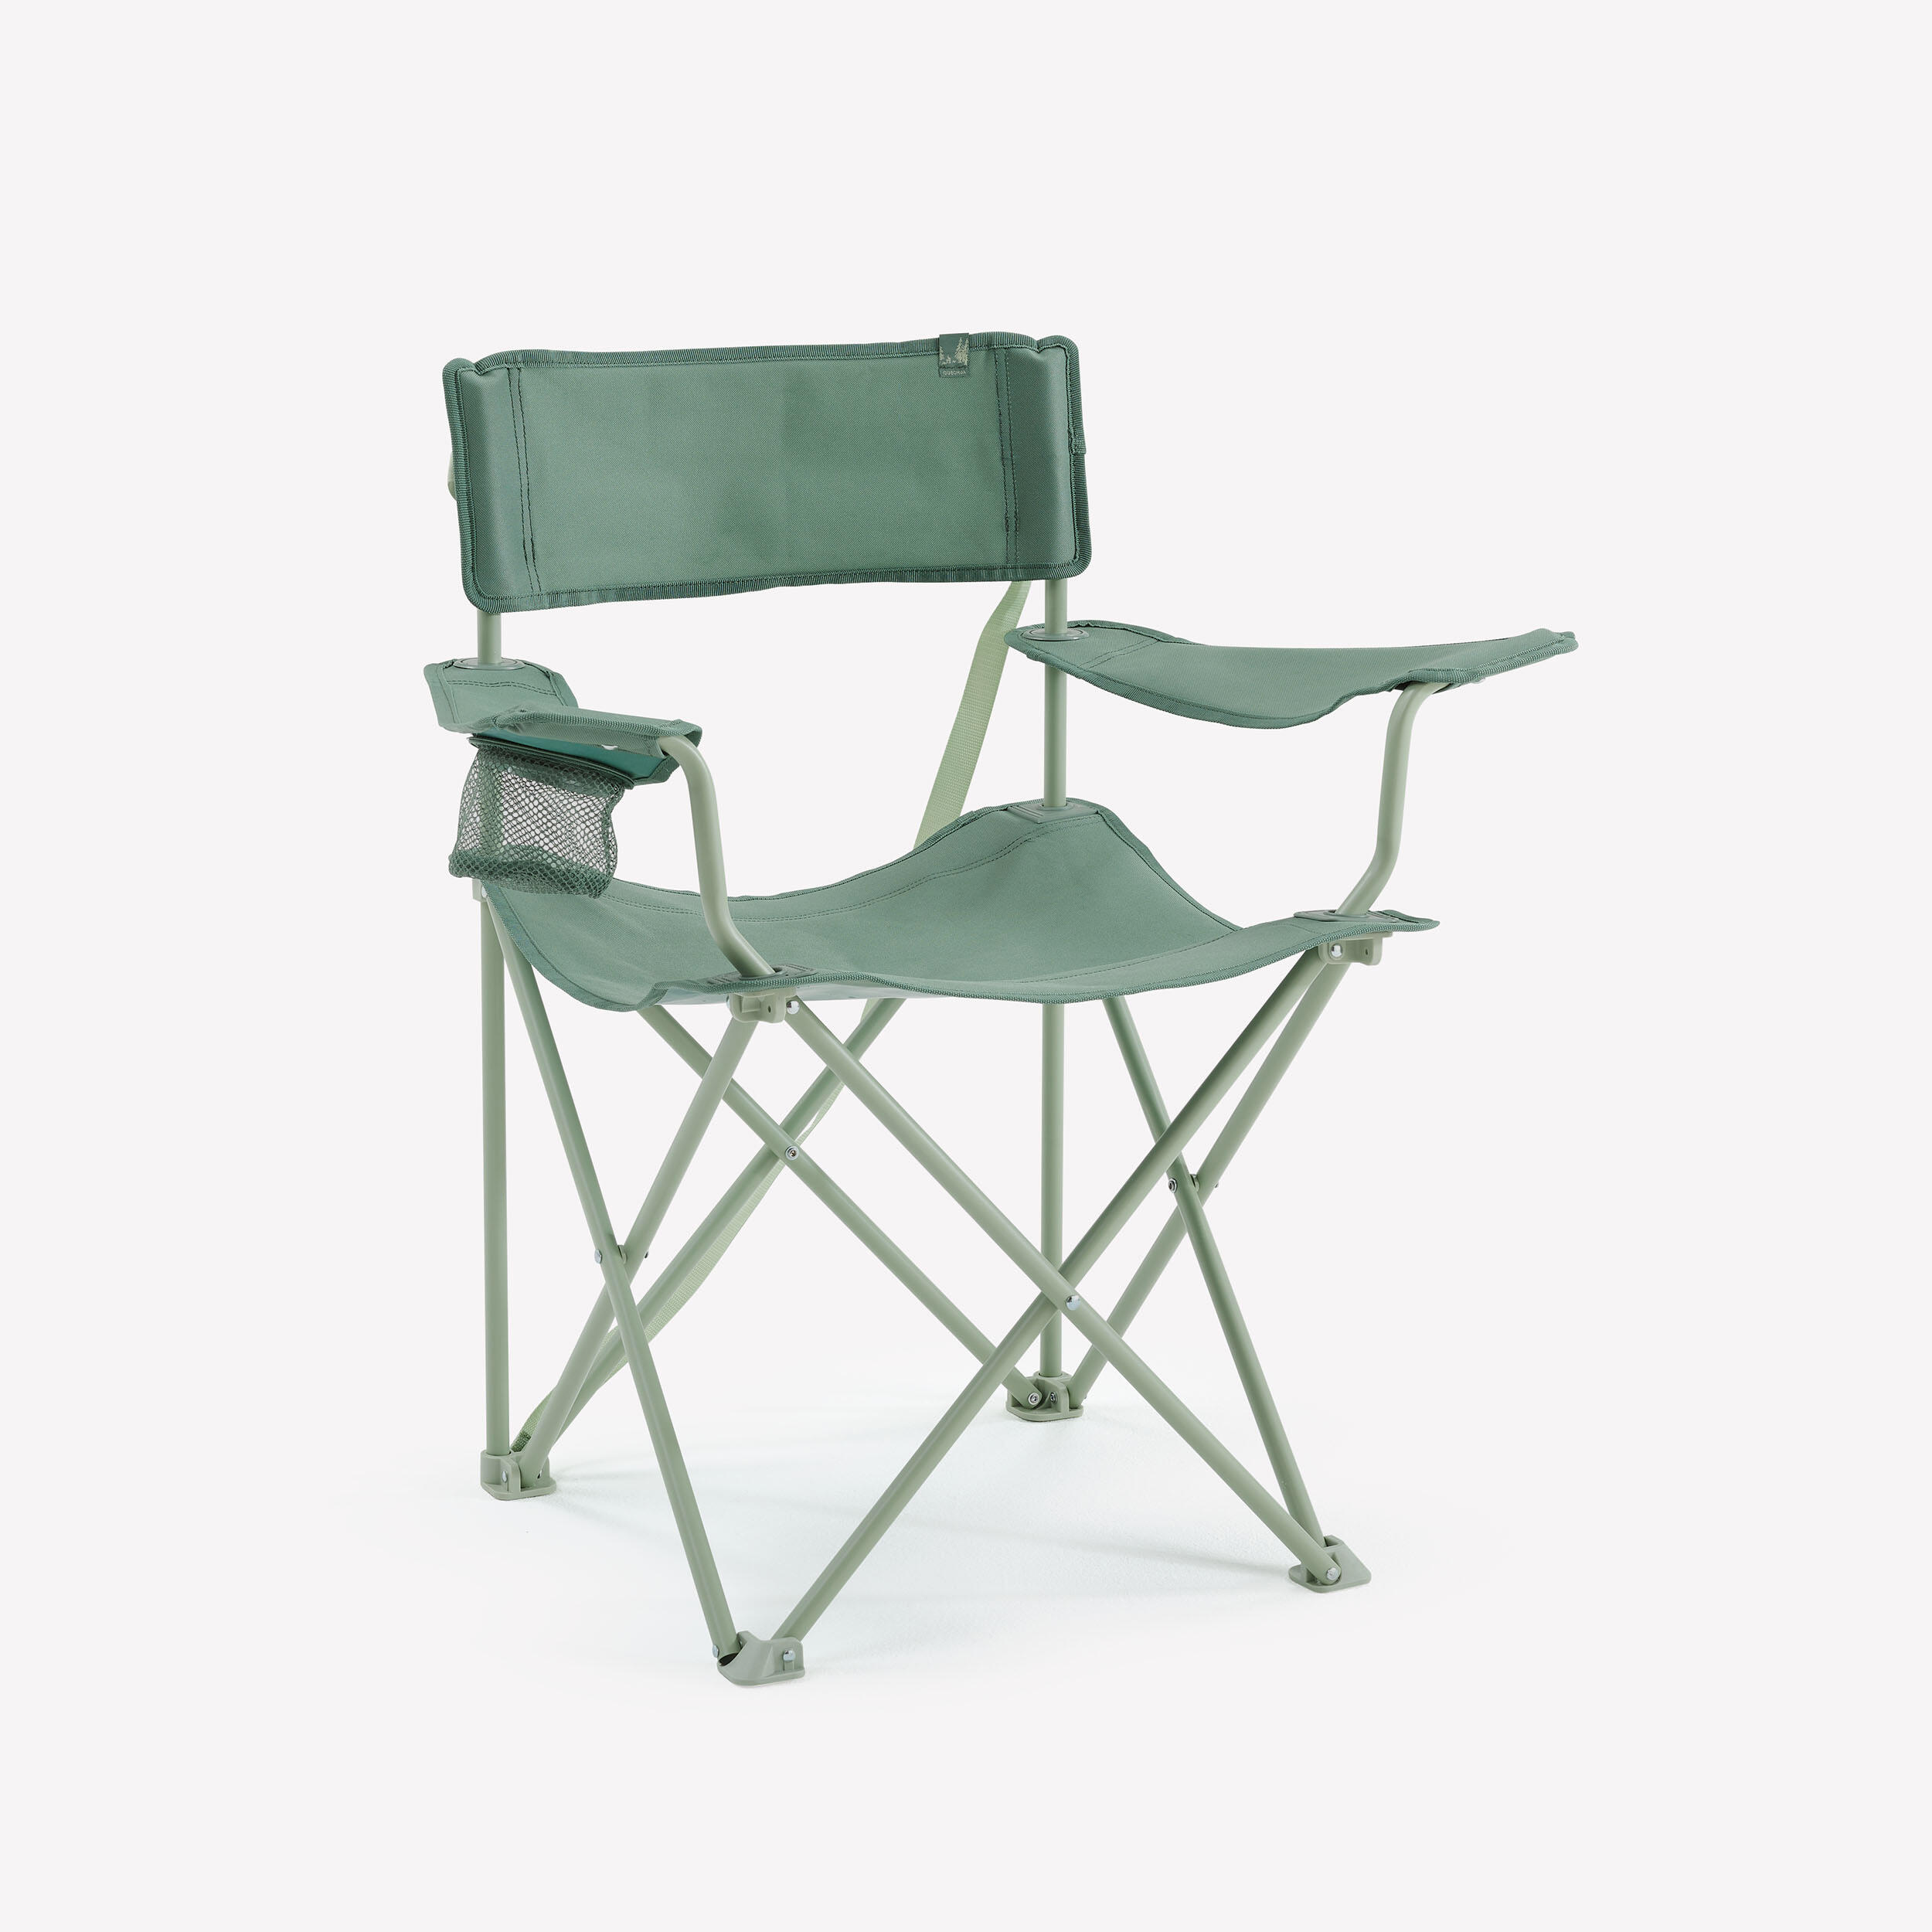 FOLDING CAMPING CHAIR 1/7